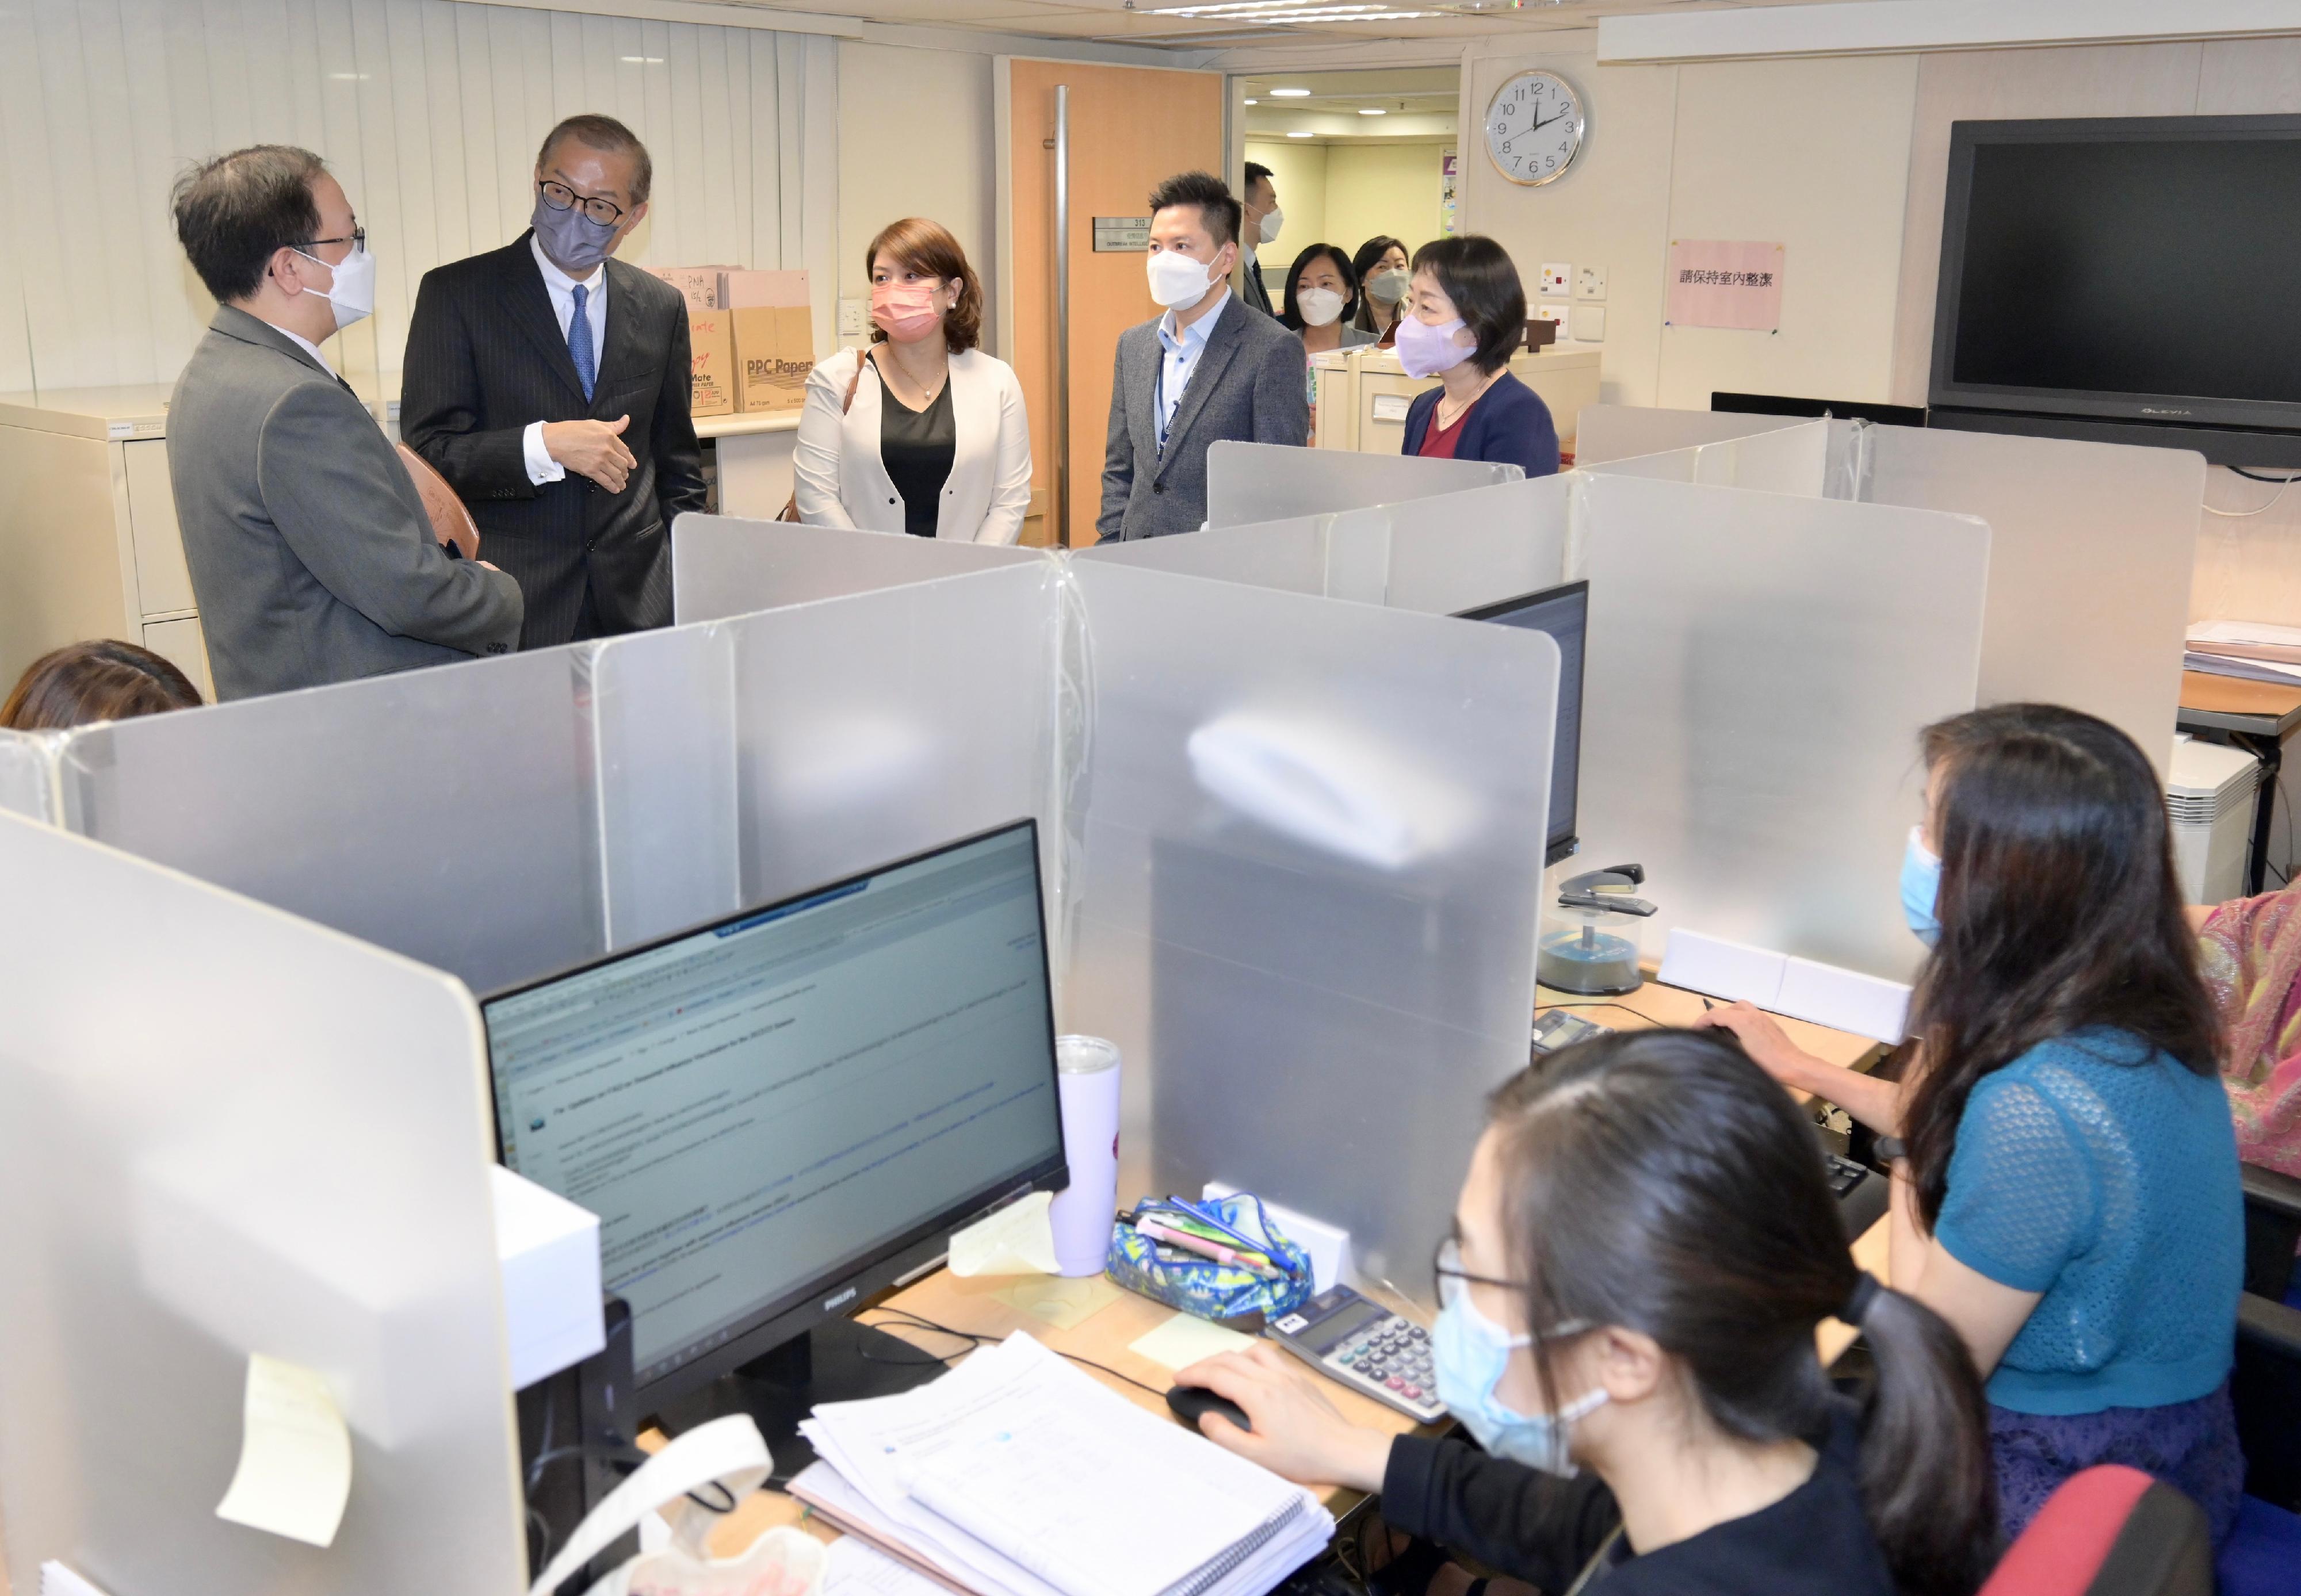 The Secretary for Health, Professor Lo Chung-mau (second left), and the Under Secretary for Health, Dr Libby Lee (third left), accompanied by the Controller of the Centre for Health Protection (CHP) of the Department of Health (DH), Dr Edwin Tsui (fourth left), visit the Outbreak Intelligence Centre of the CHP of the DH today (August 3) to learn about the work of the Centre in combating the COVID-19 epidemic.